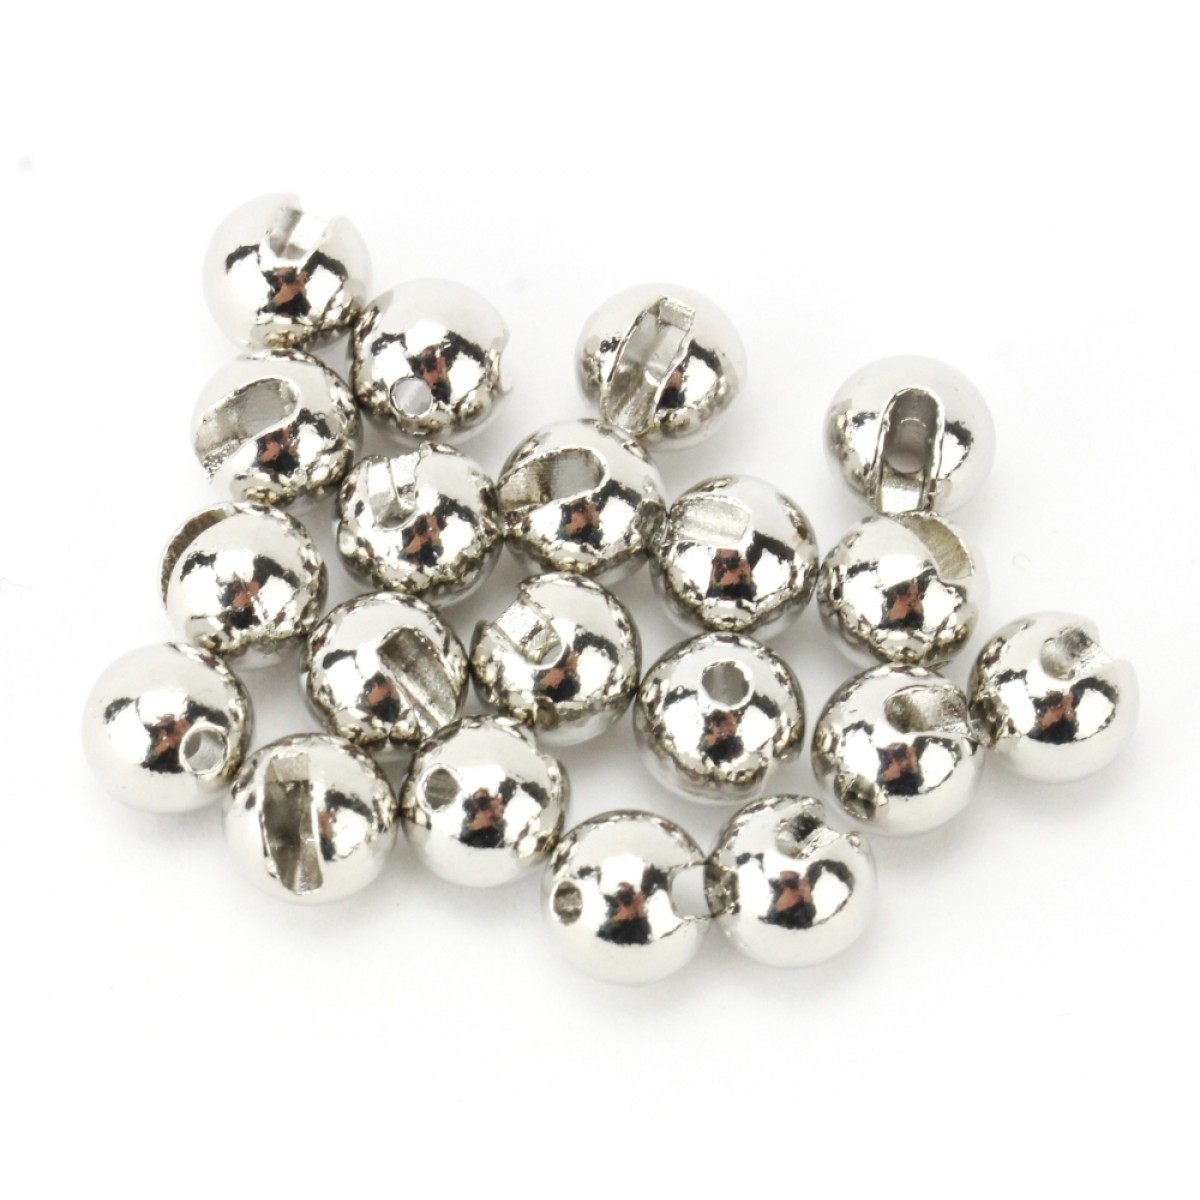 Slotted Tungsten Beads (silver)